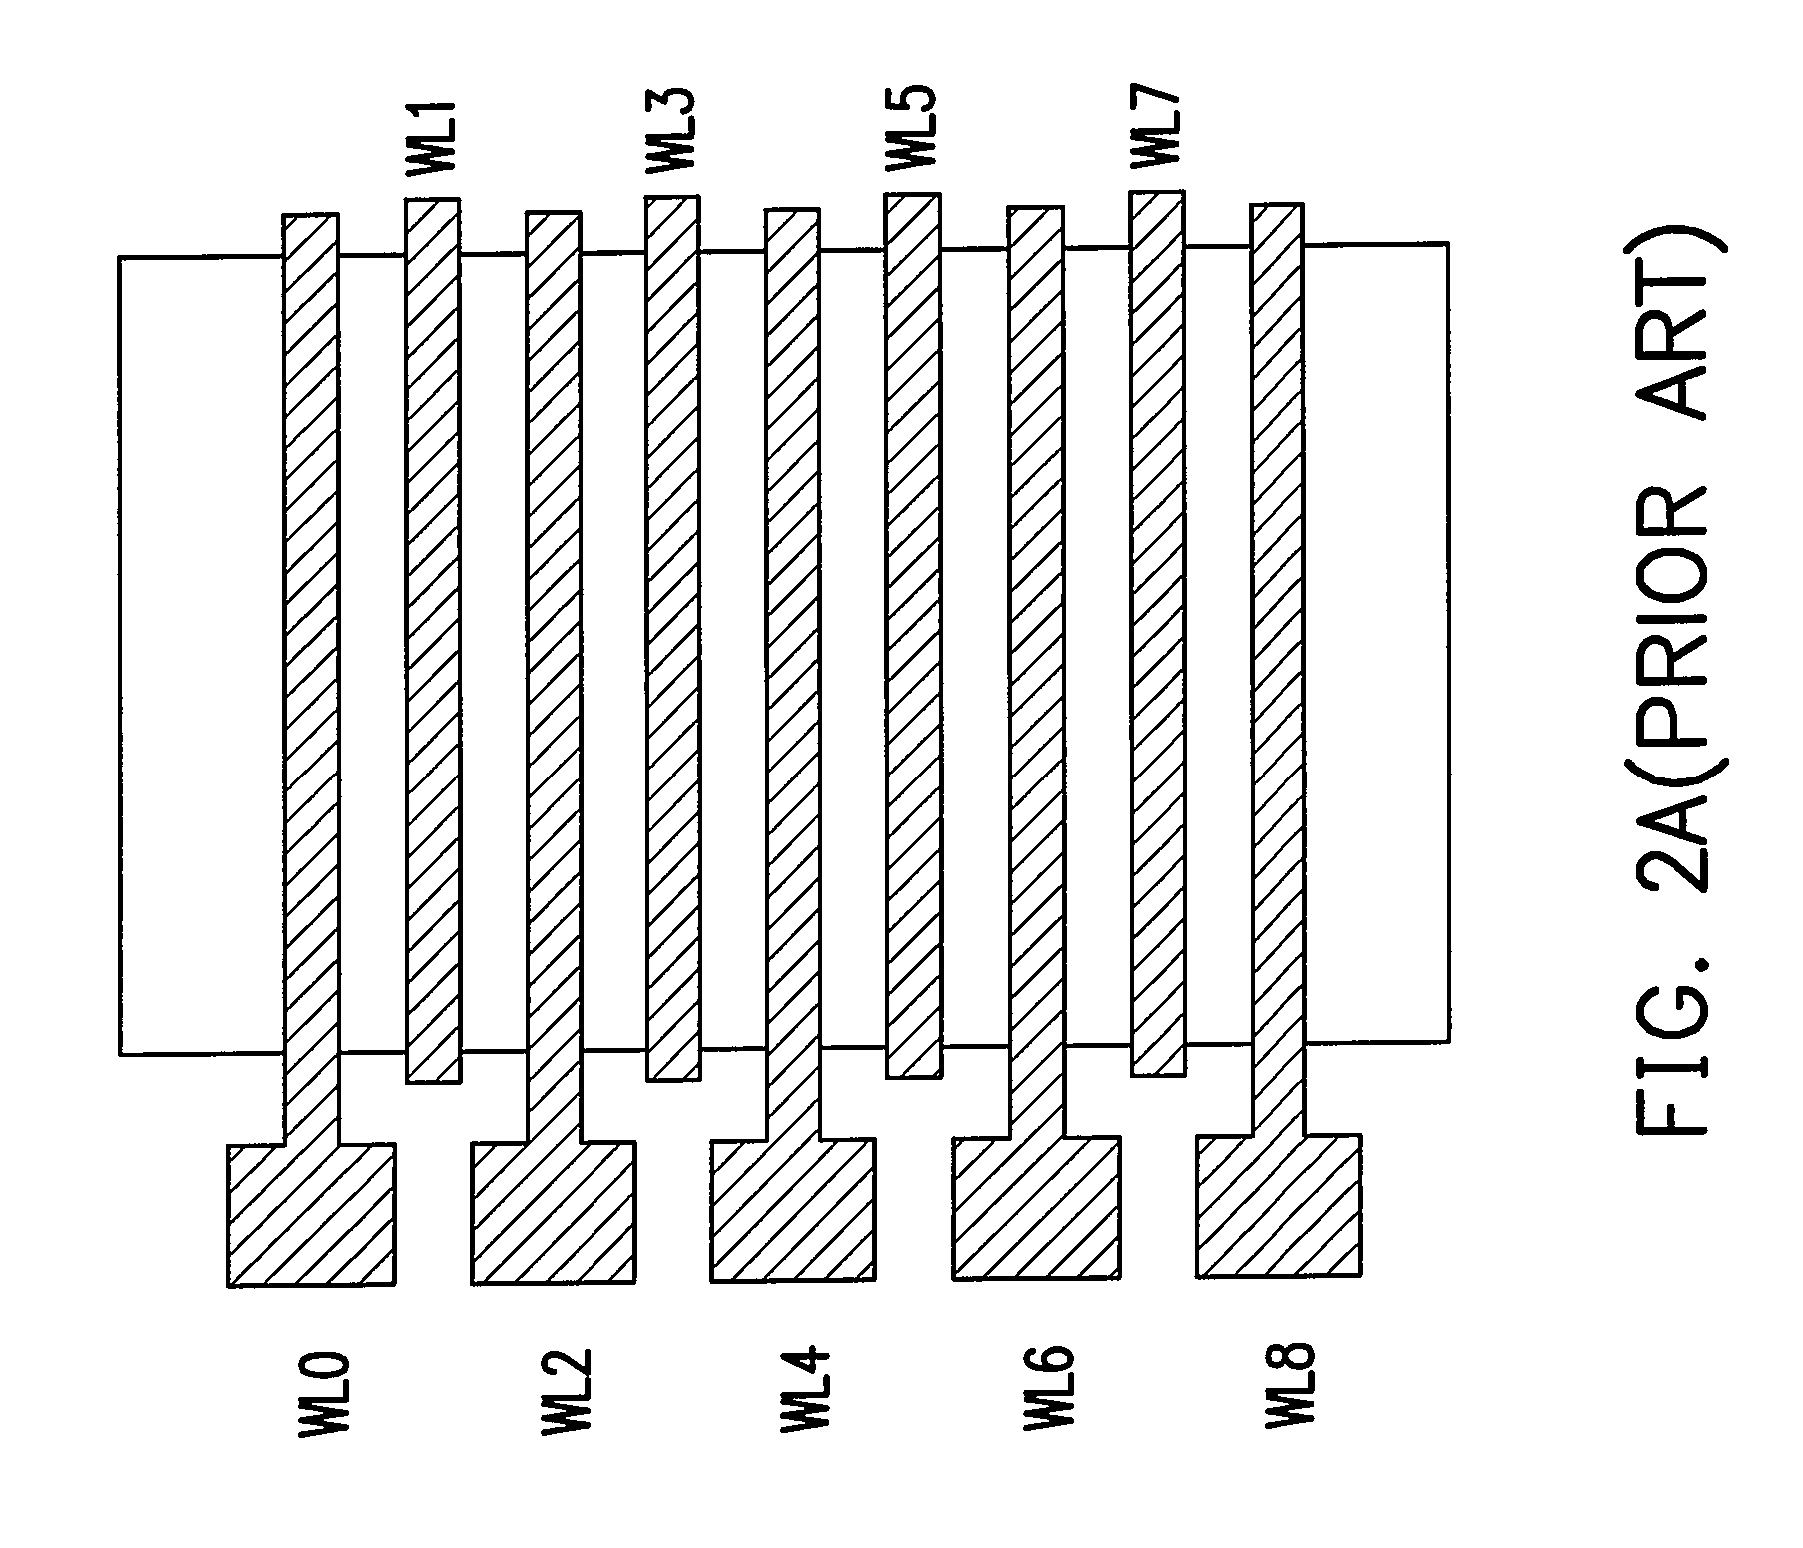 Operation method of non-volatile memory and method of improving coupling interference from nitride-based memory